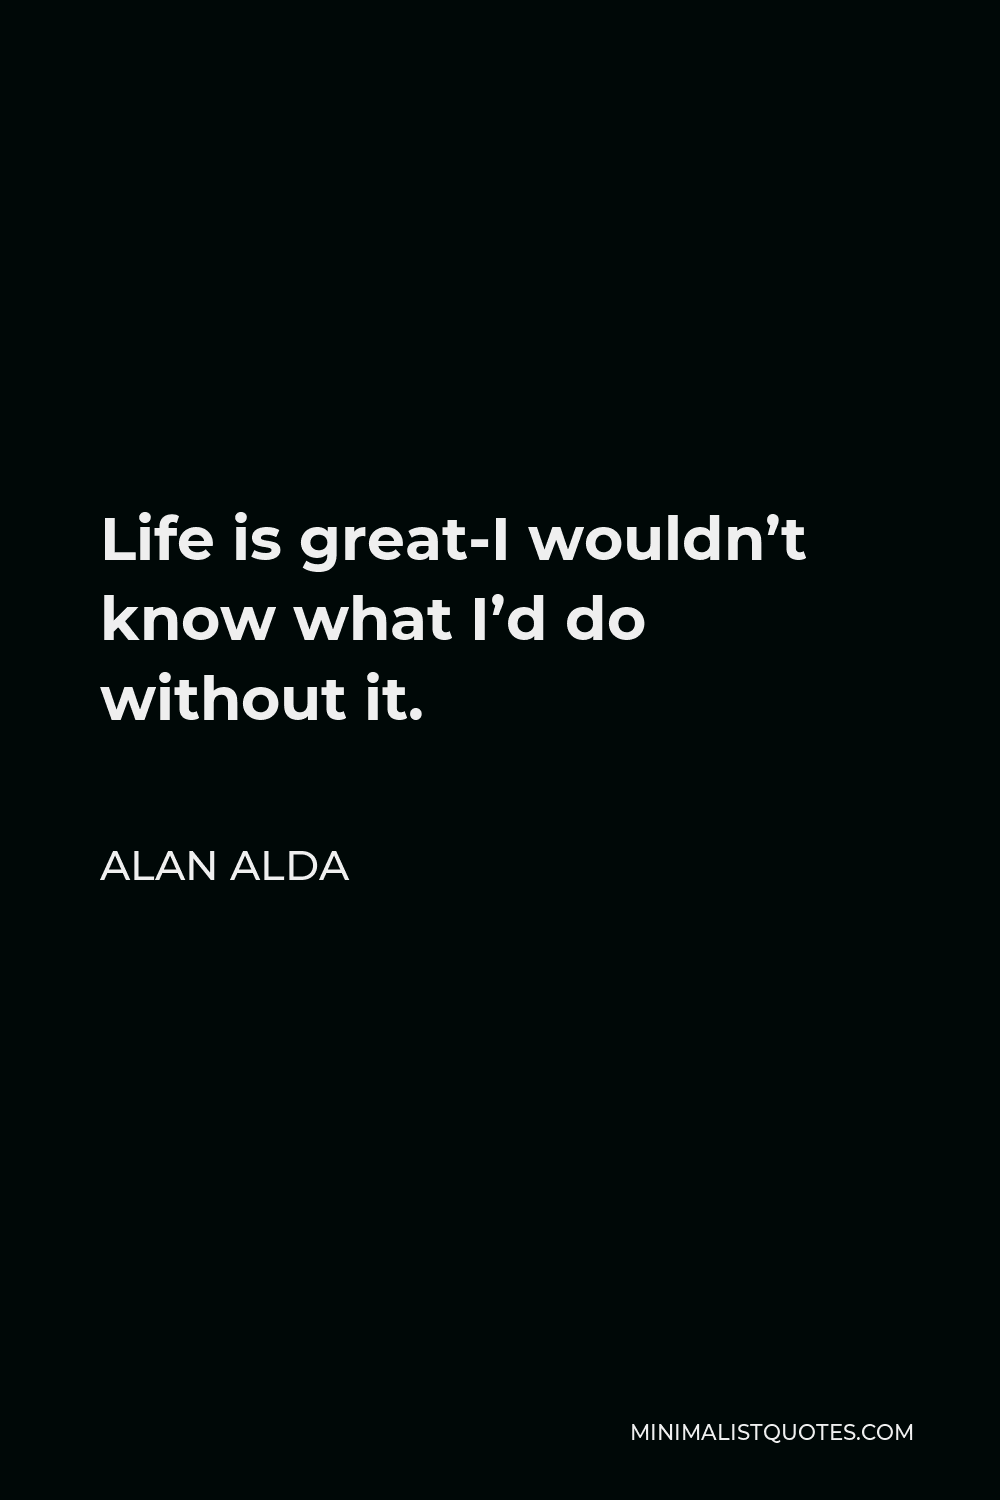 Alan Alda Quote - Life is great-I wouldn’t know what I’d do without it.